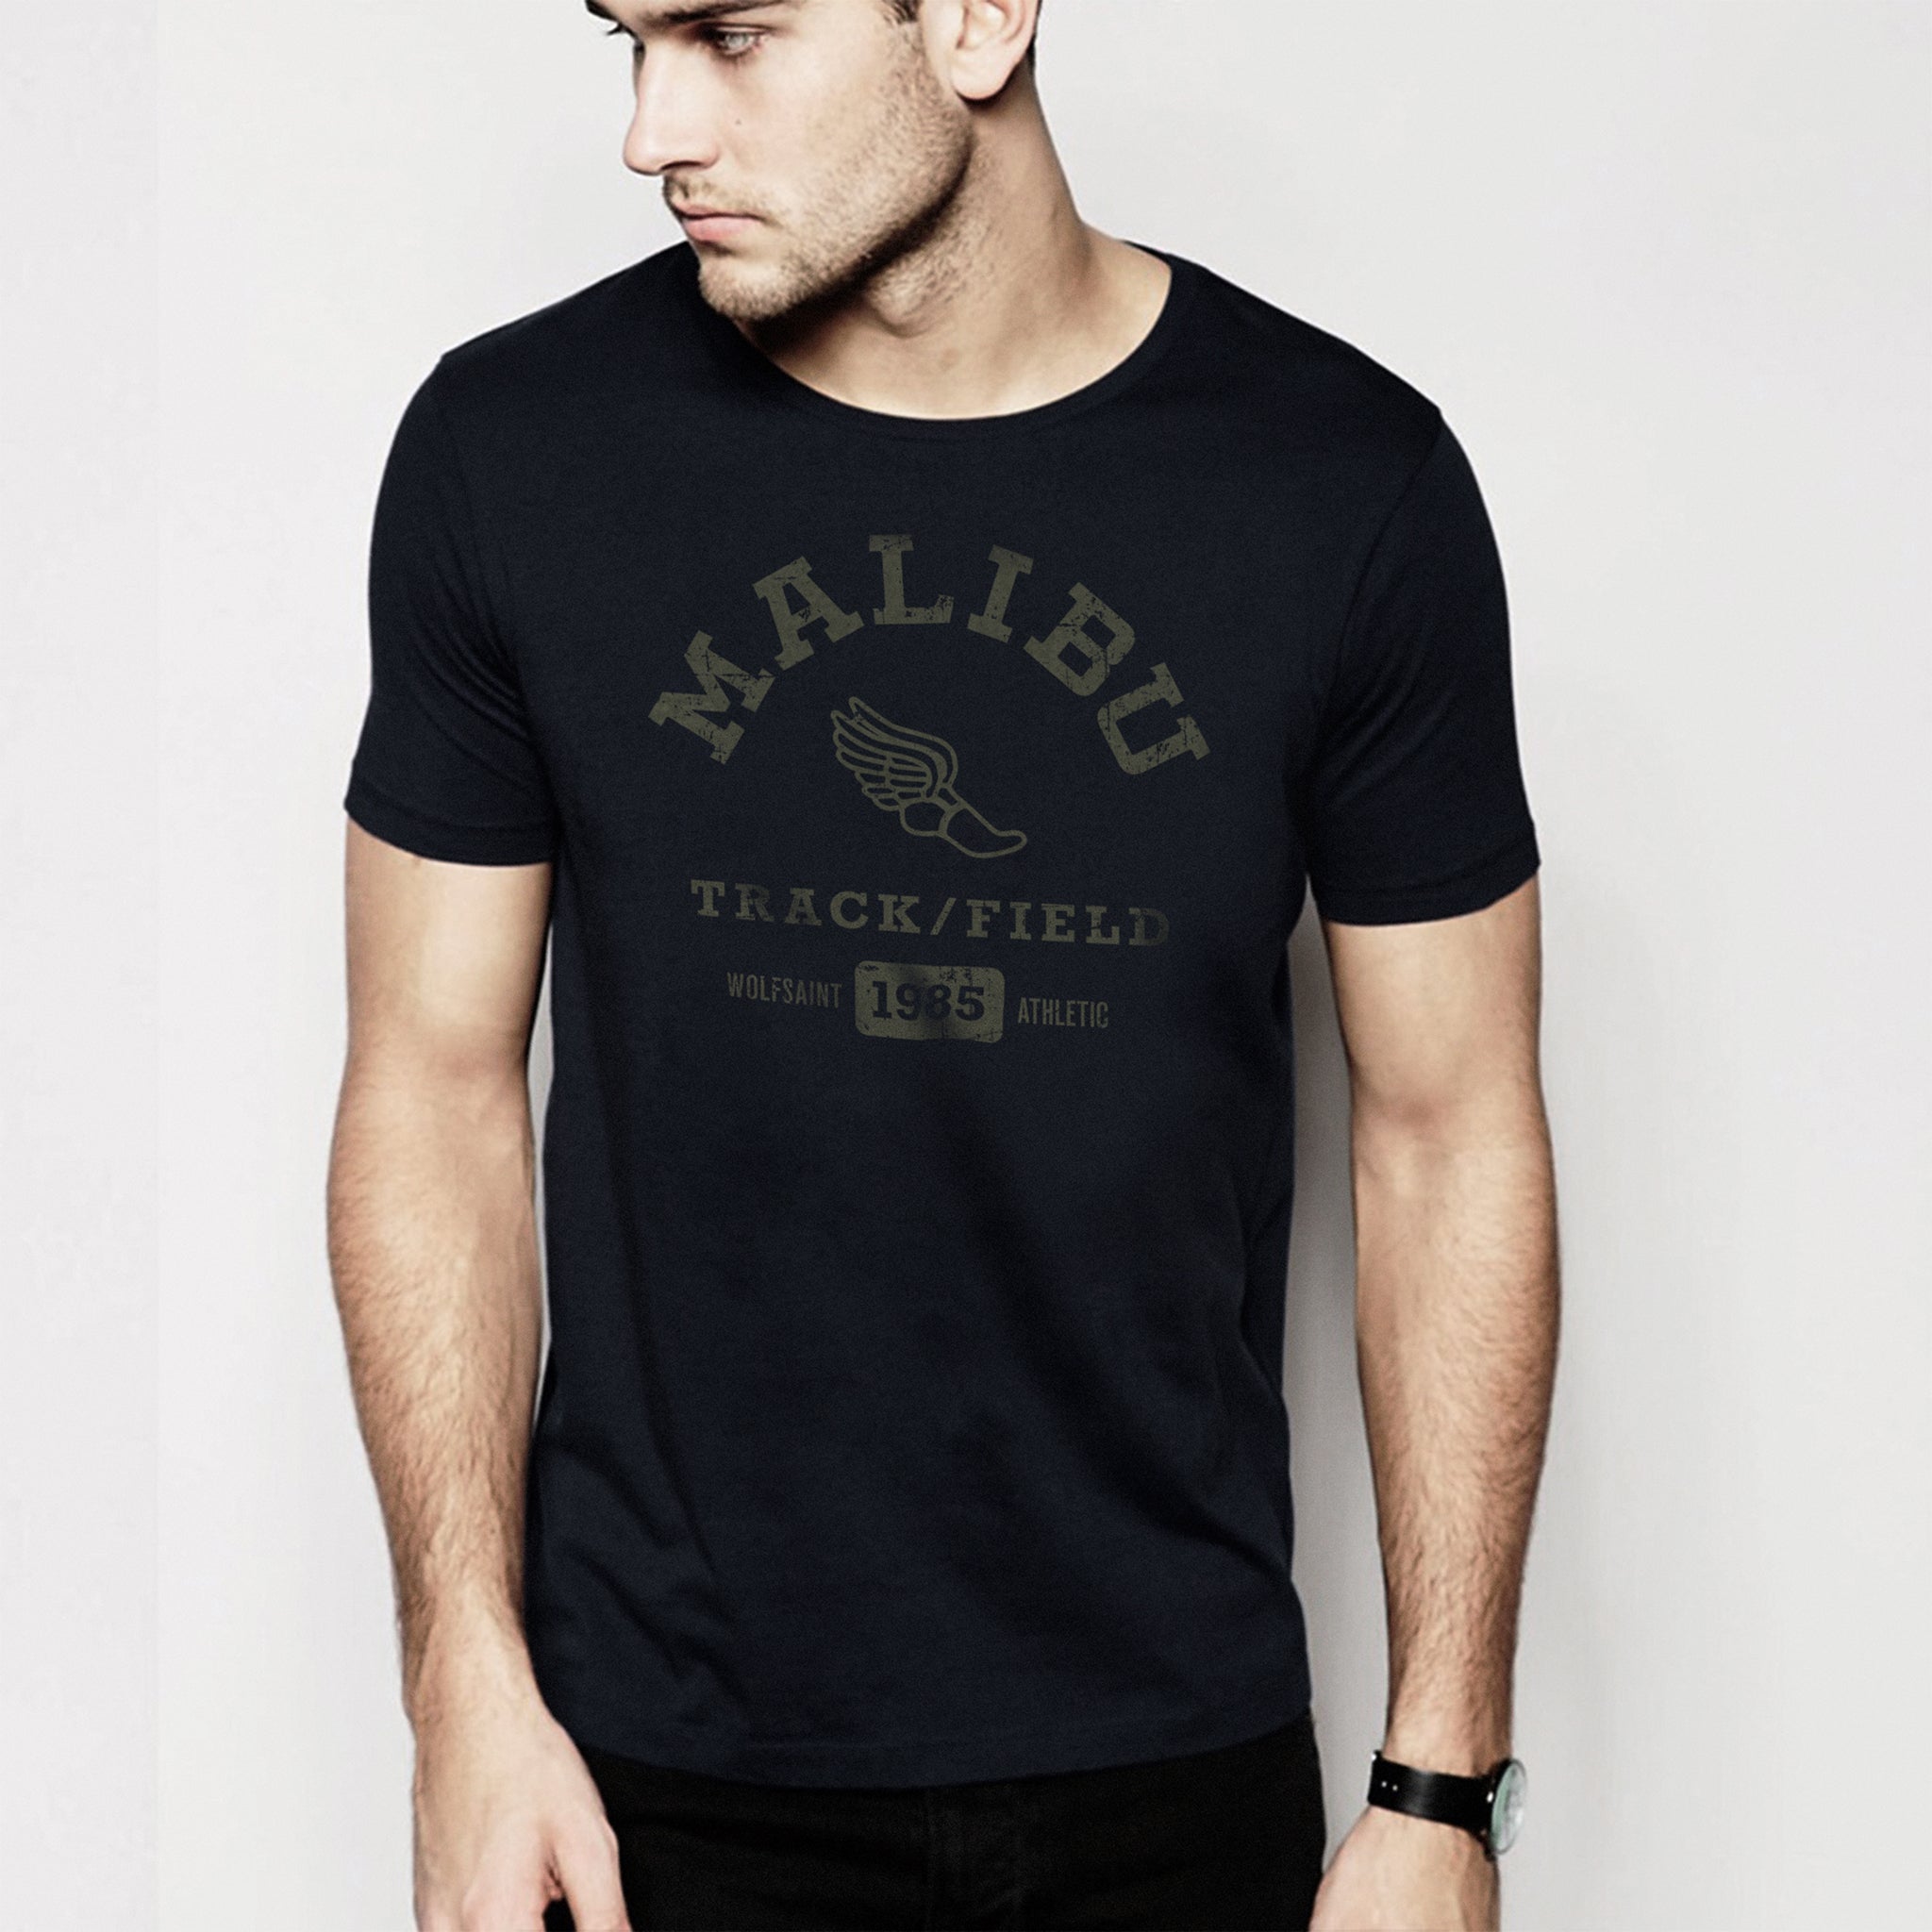 A male model in a studio wearing fashionable, vintage-inspired retro t-shirt in Classic Black, featuring a graphic representing a sarcastic and fictitious Malibu (California) Track and Field team. From wolfsaint.net